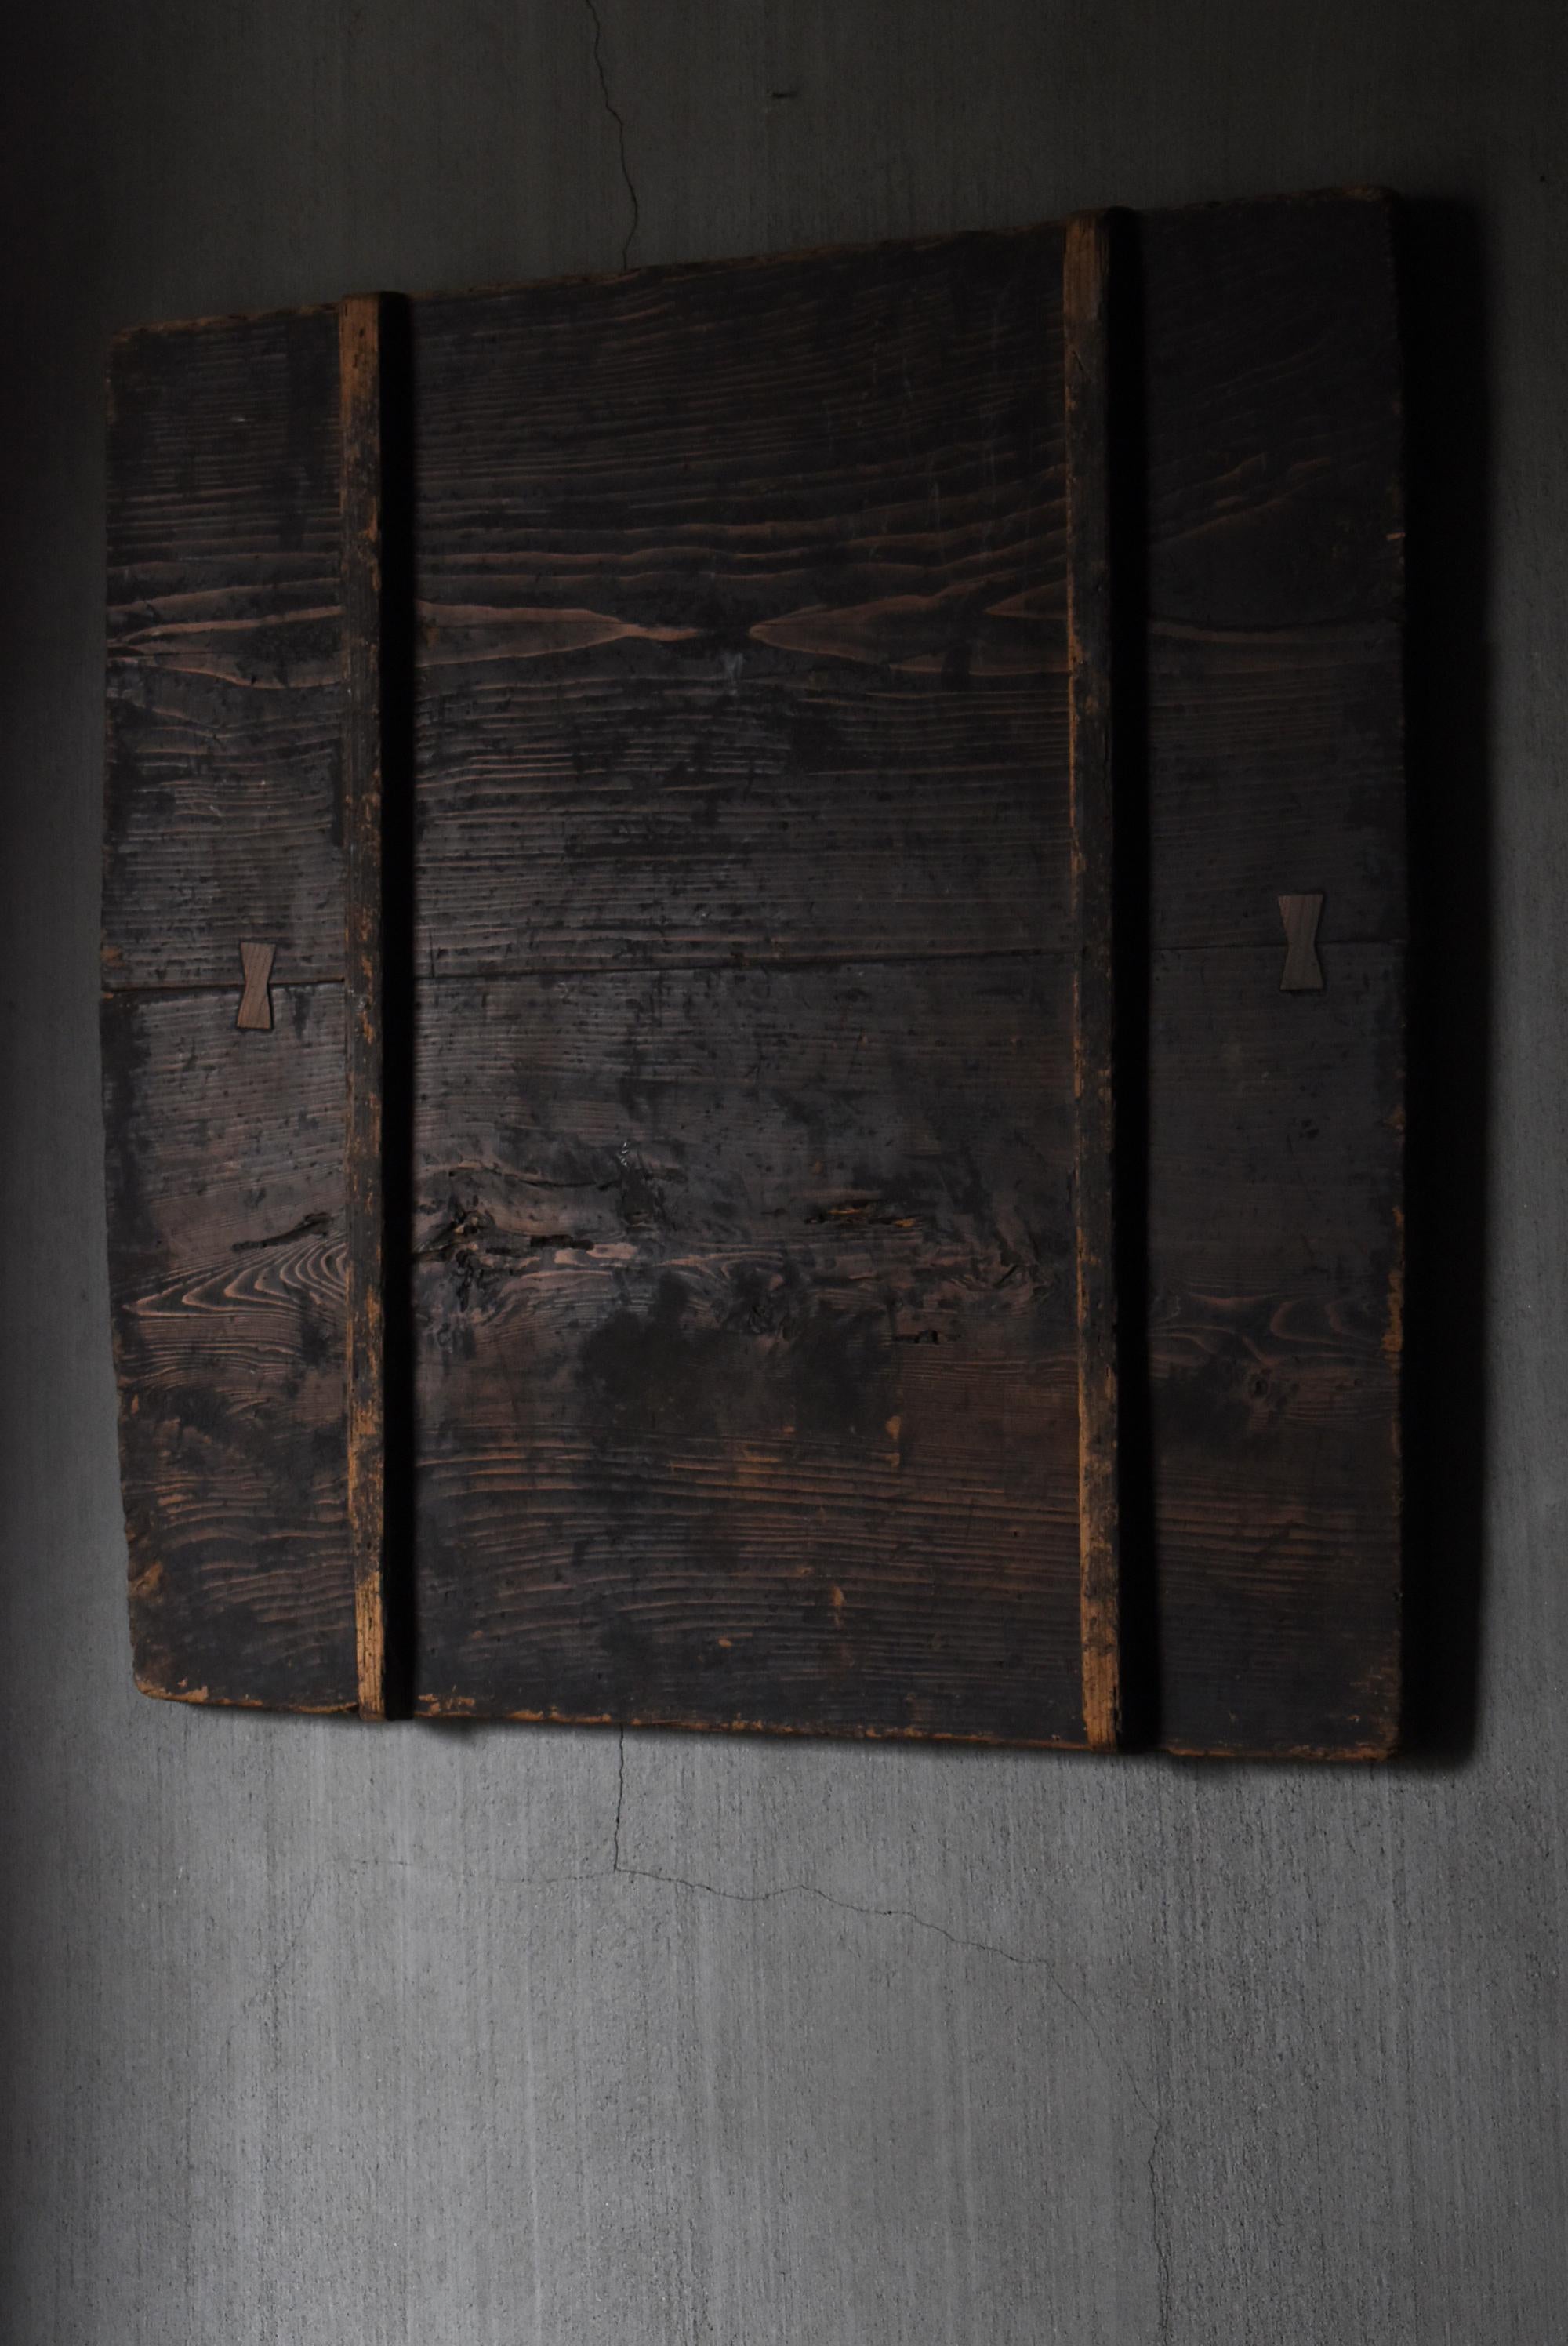 This is a very old Japanese workboard.
It was made during the Meiji period (1860s-1900s).
It is made of pine wood.

It was originally a workboard for kneading wheat.
Through years of use and aging, it has become as beautiful as an abstract